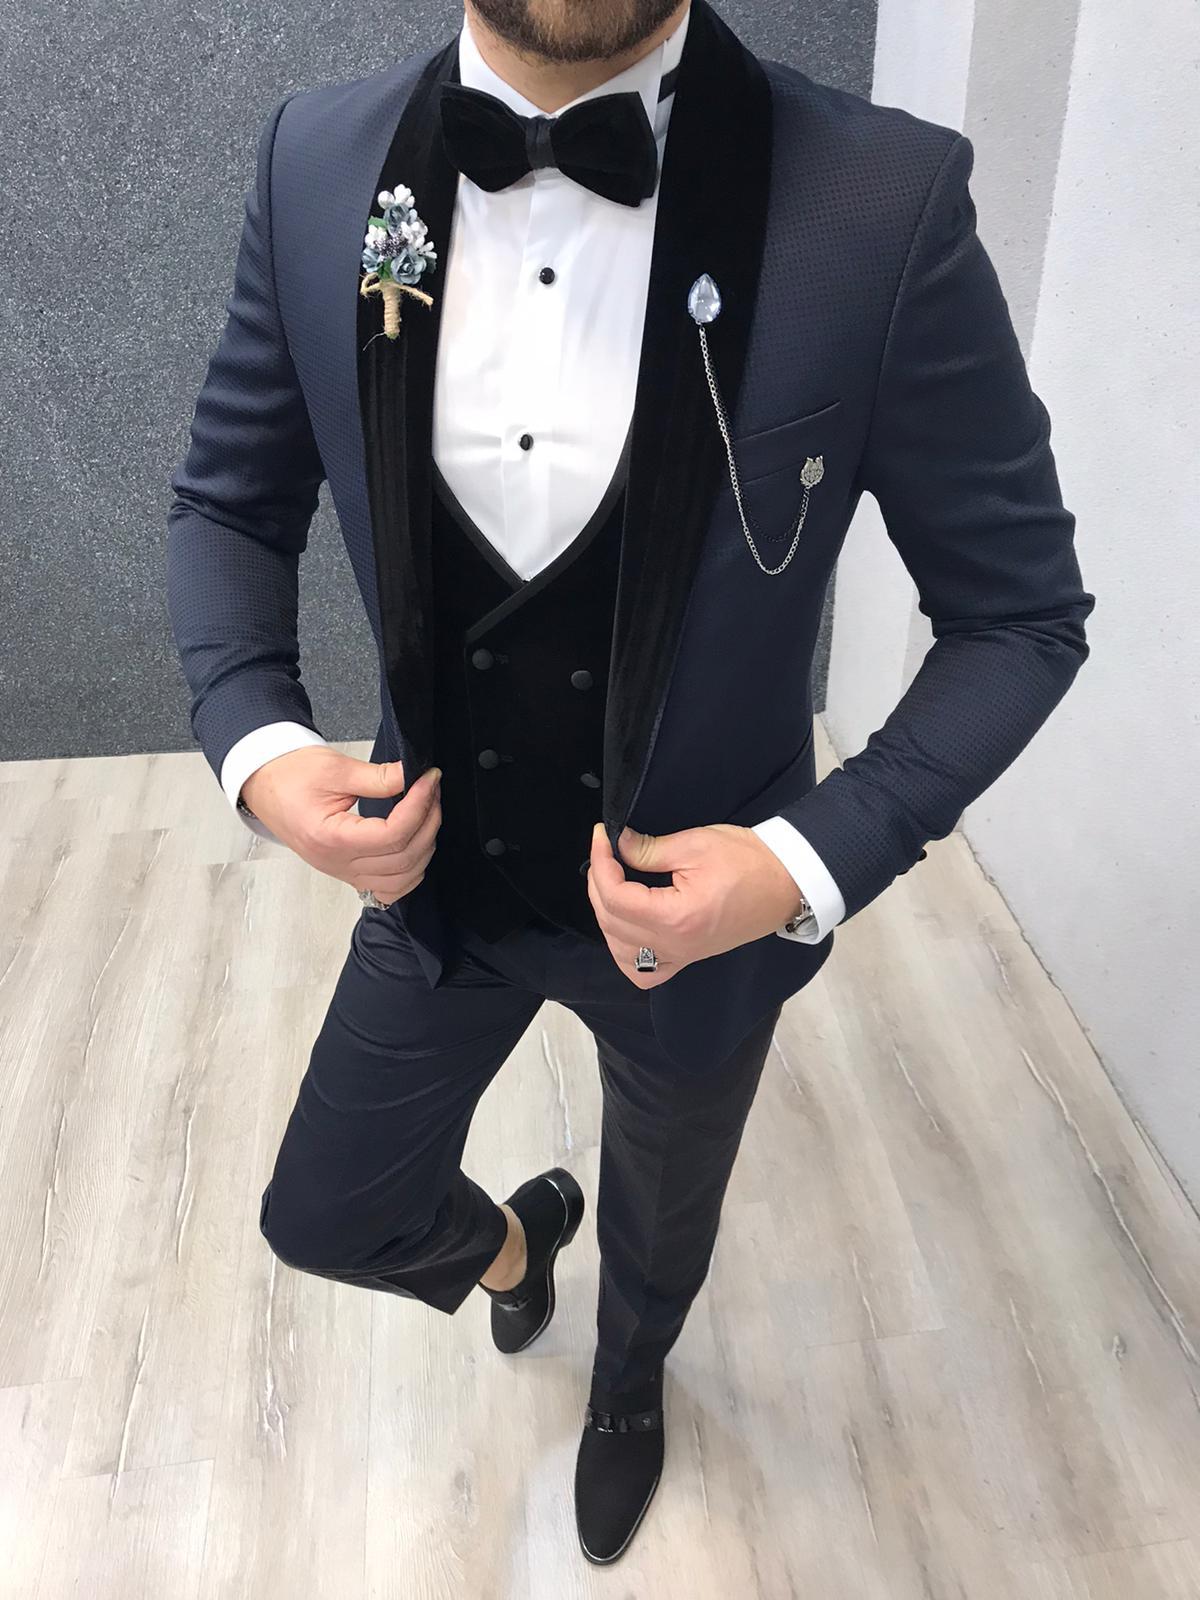 Blue Tuxedos and Wedding Attire for Groom by BespokeDailyShop